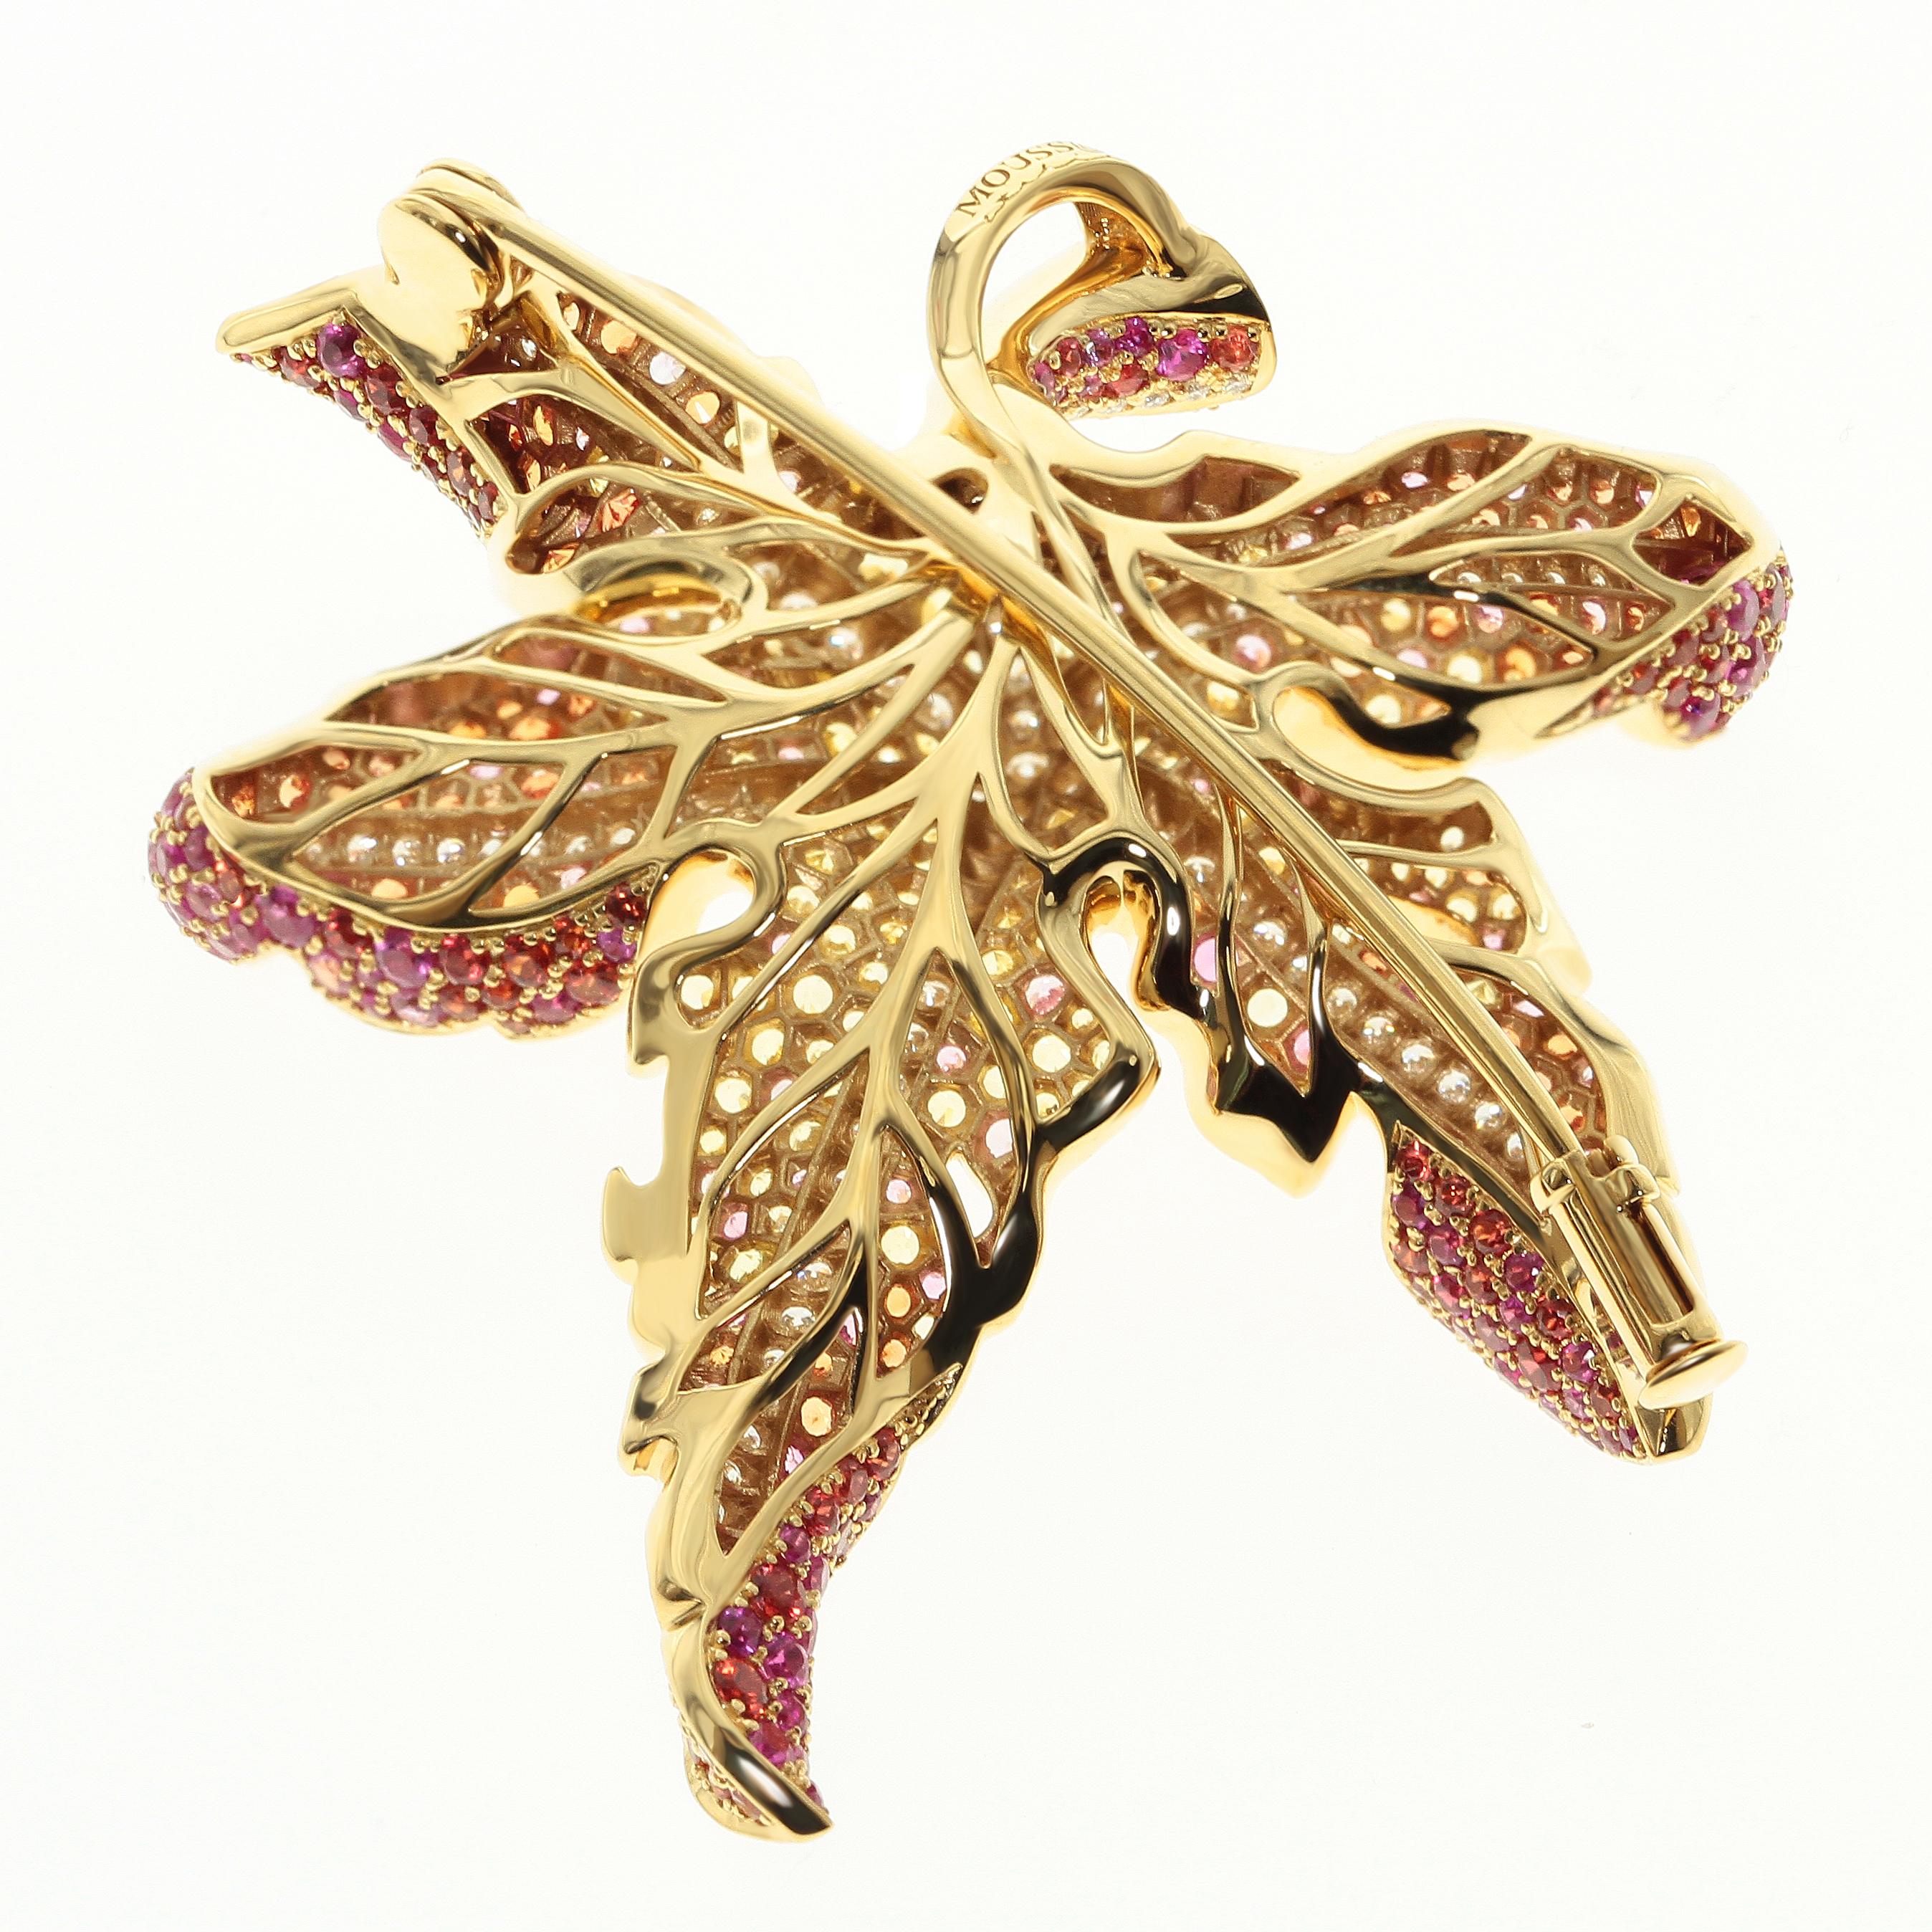 Autumn Color Diamond Pink Yellow Sapphire Maple Leaf Brooch
Can be wear as a Pendant

Accompanied with the earrings LU116414762421  and the ring LU116414762401

40x50x7.8 mm
15.86 gm